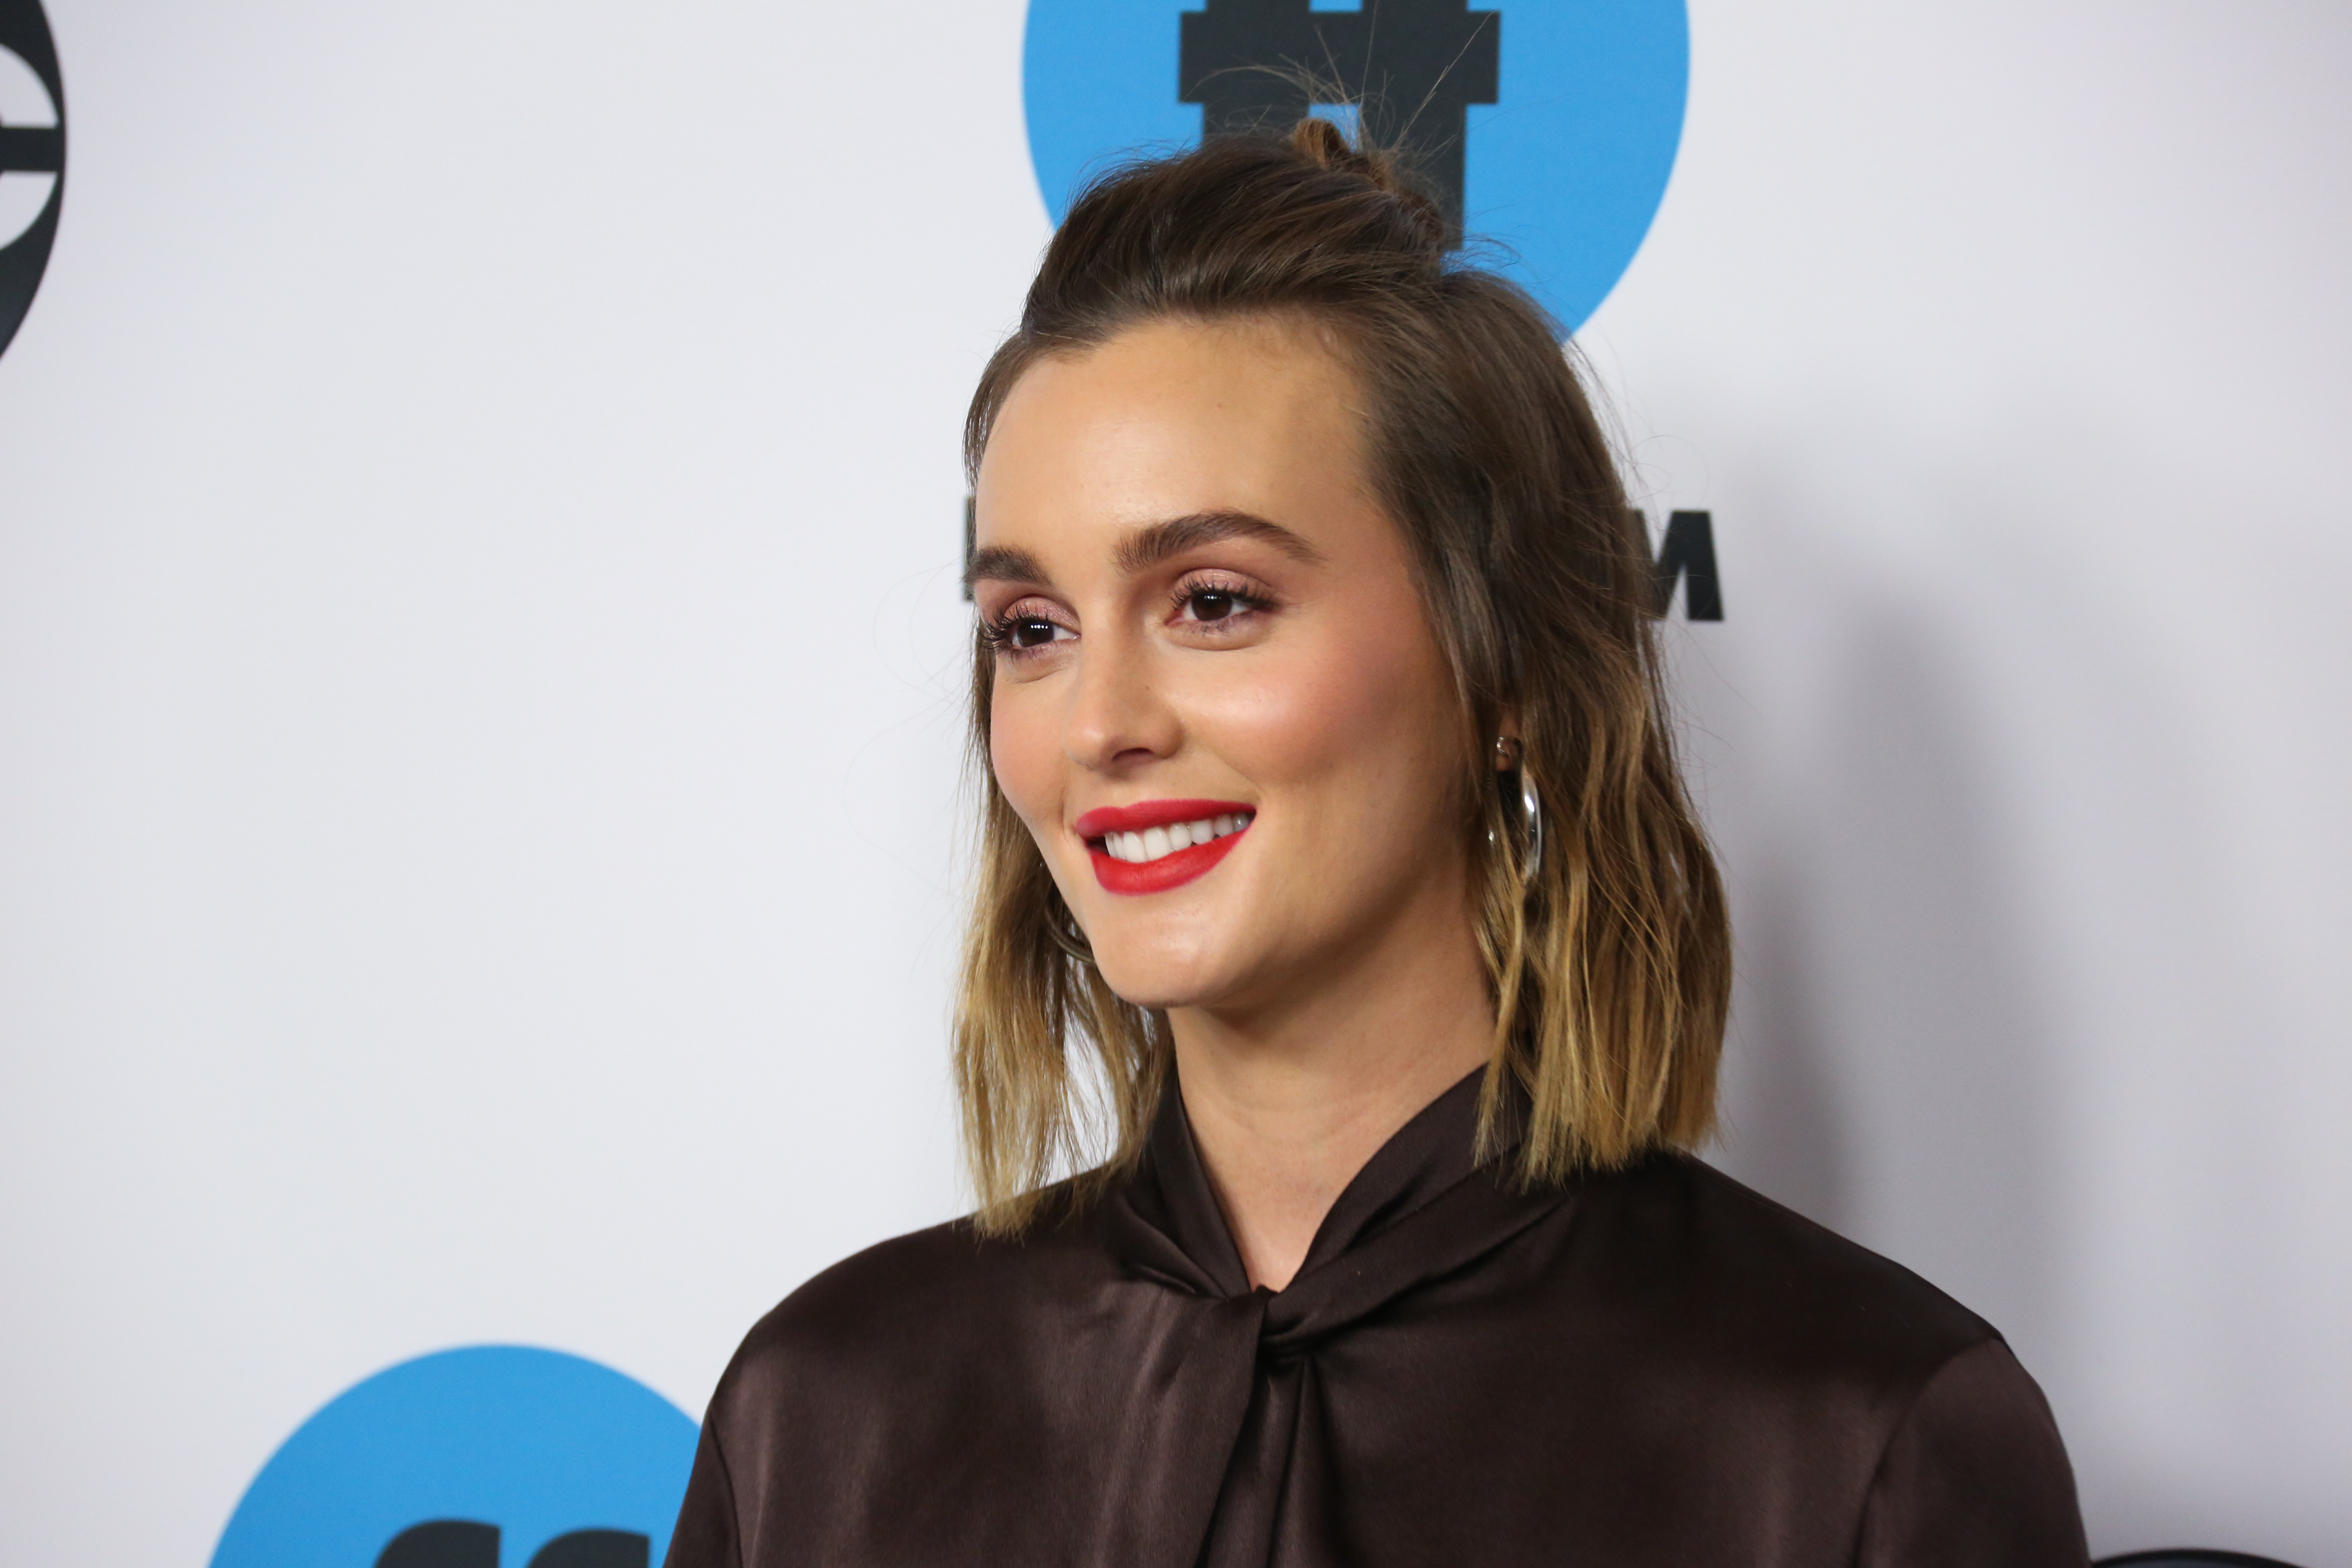 Leighton Meester attends the Disney and ABC Television 2019 TCA Winter press tour at The Langham Huntington Hotel and Spa on February 5, 2019, in Pasadena, California. | Source: Getty Images